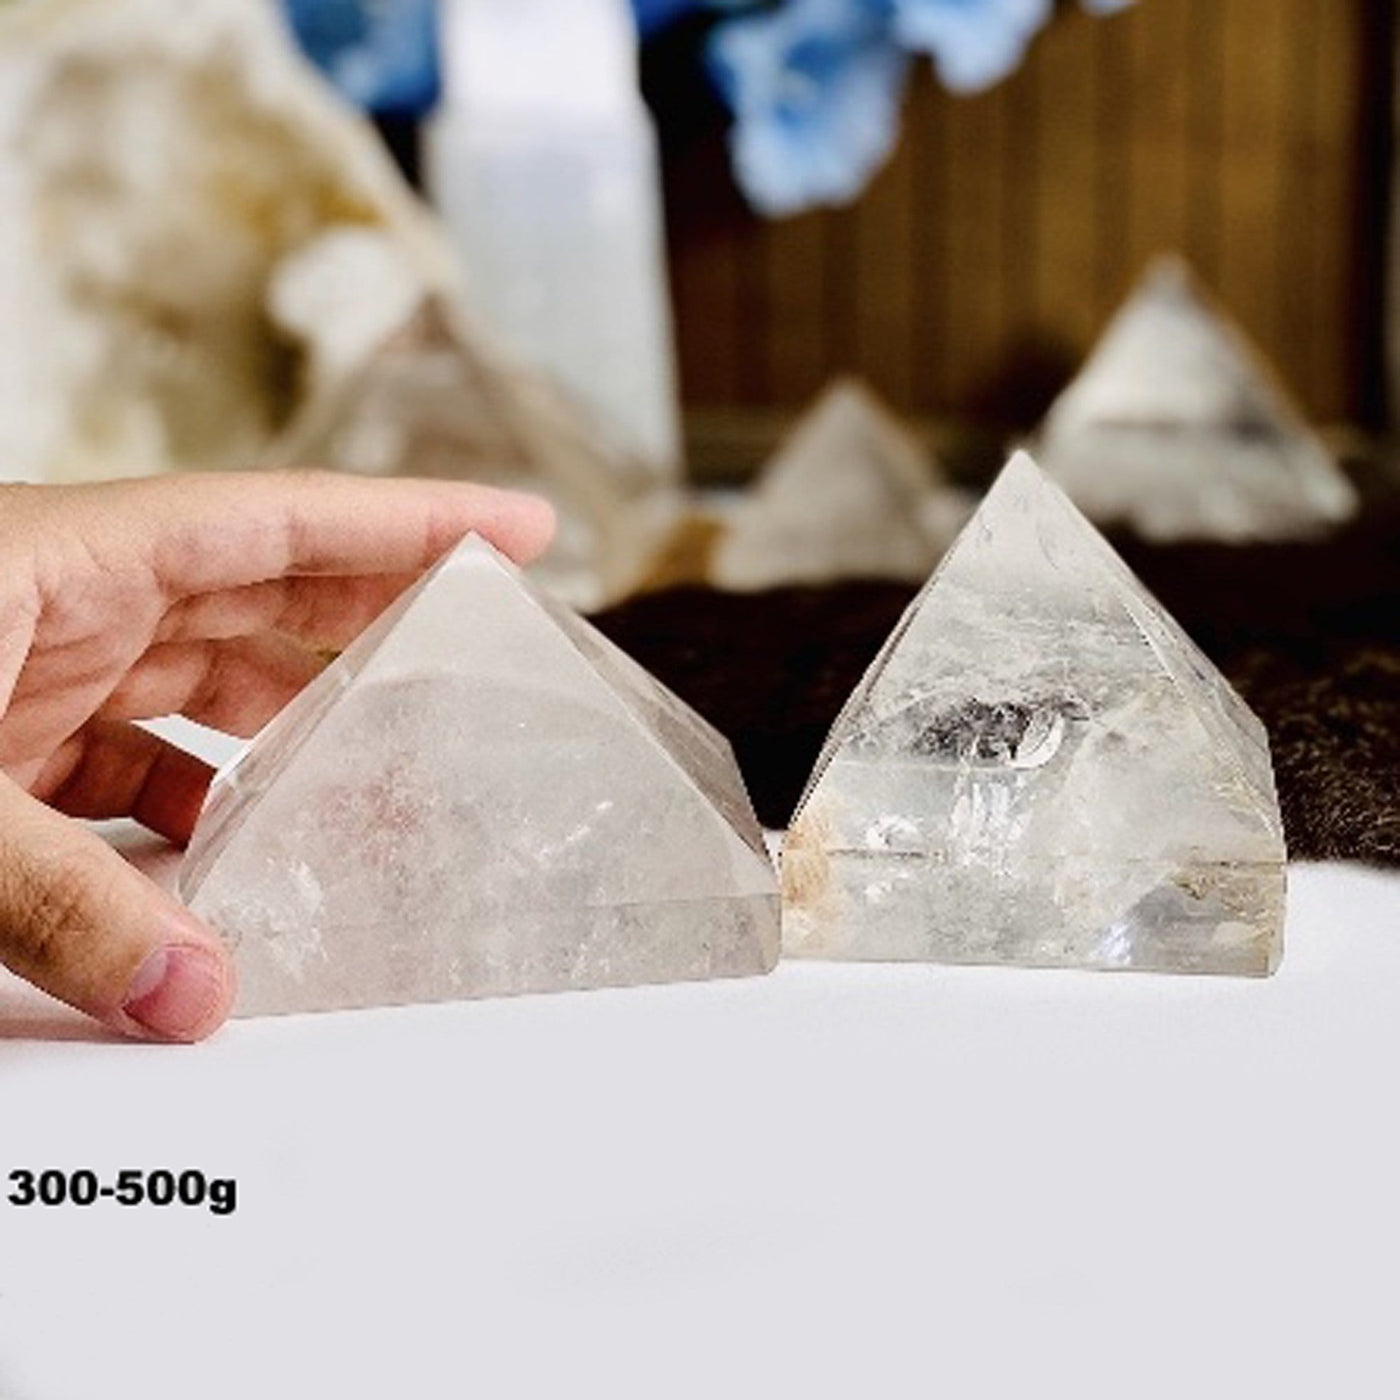 hand holding 300-500g Crystal Quartz Pyramid with others in the background